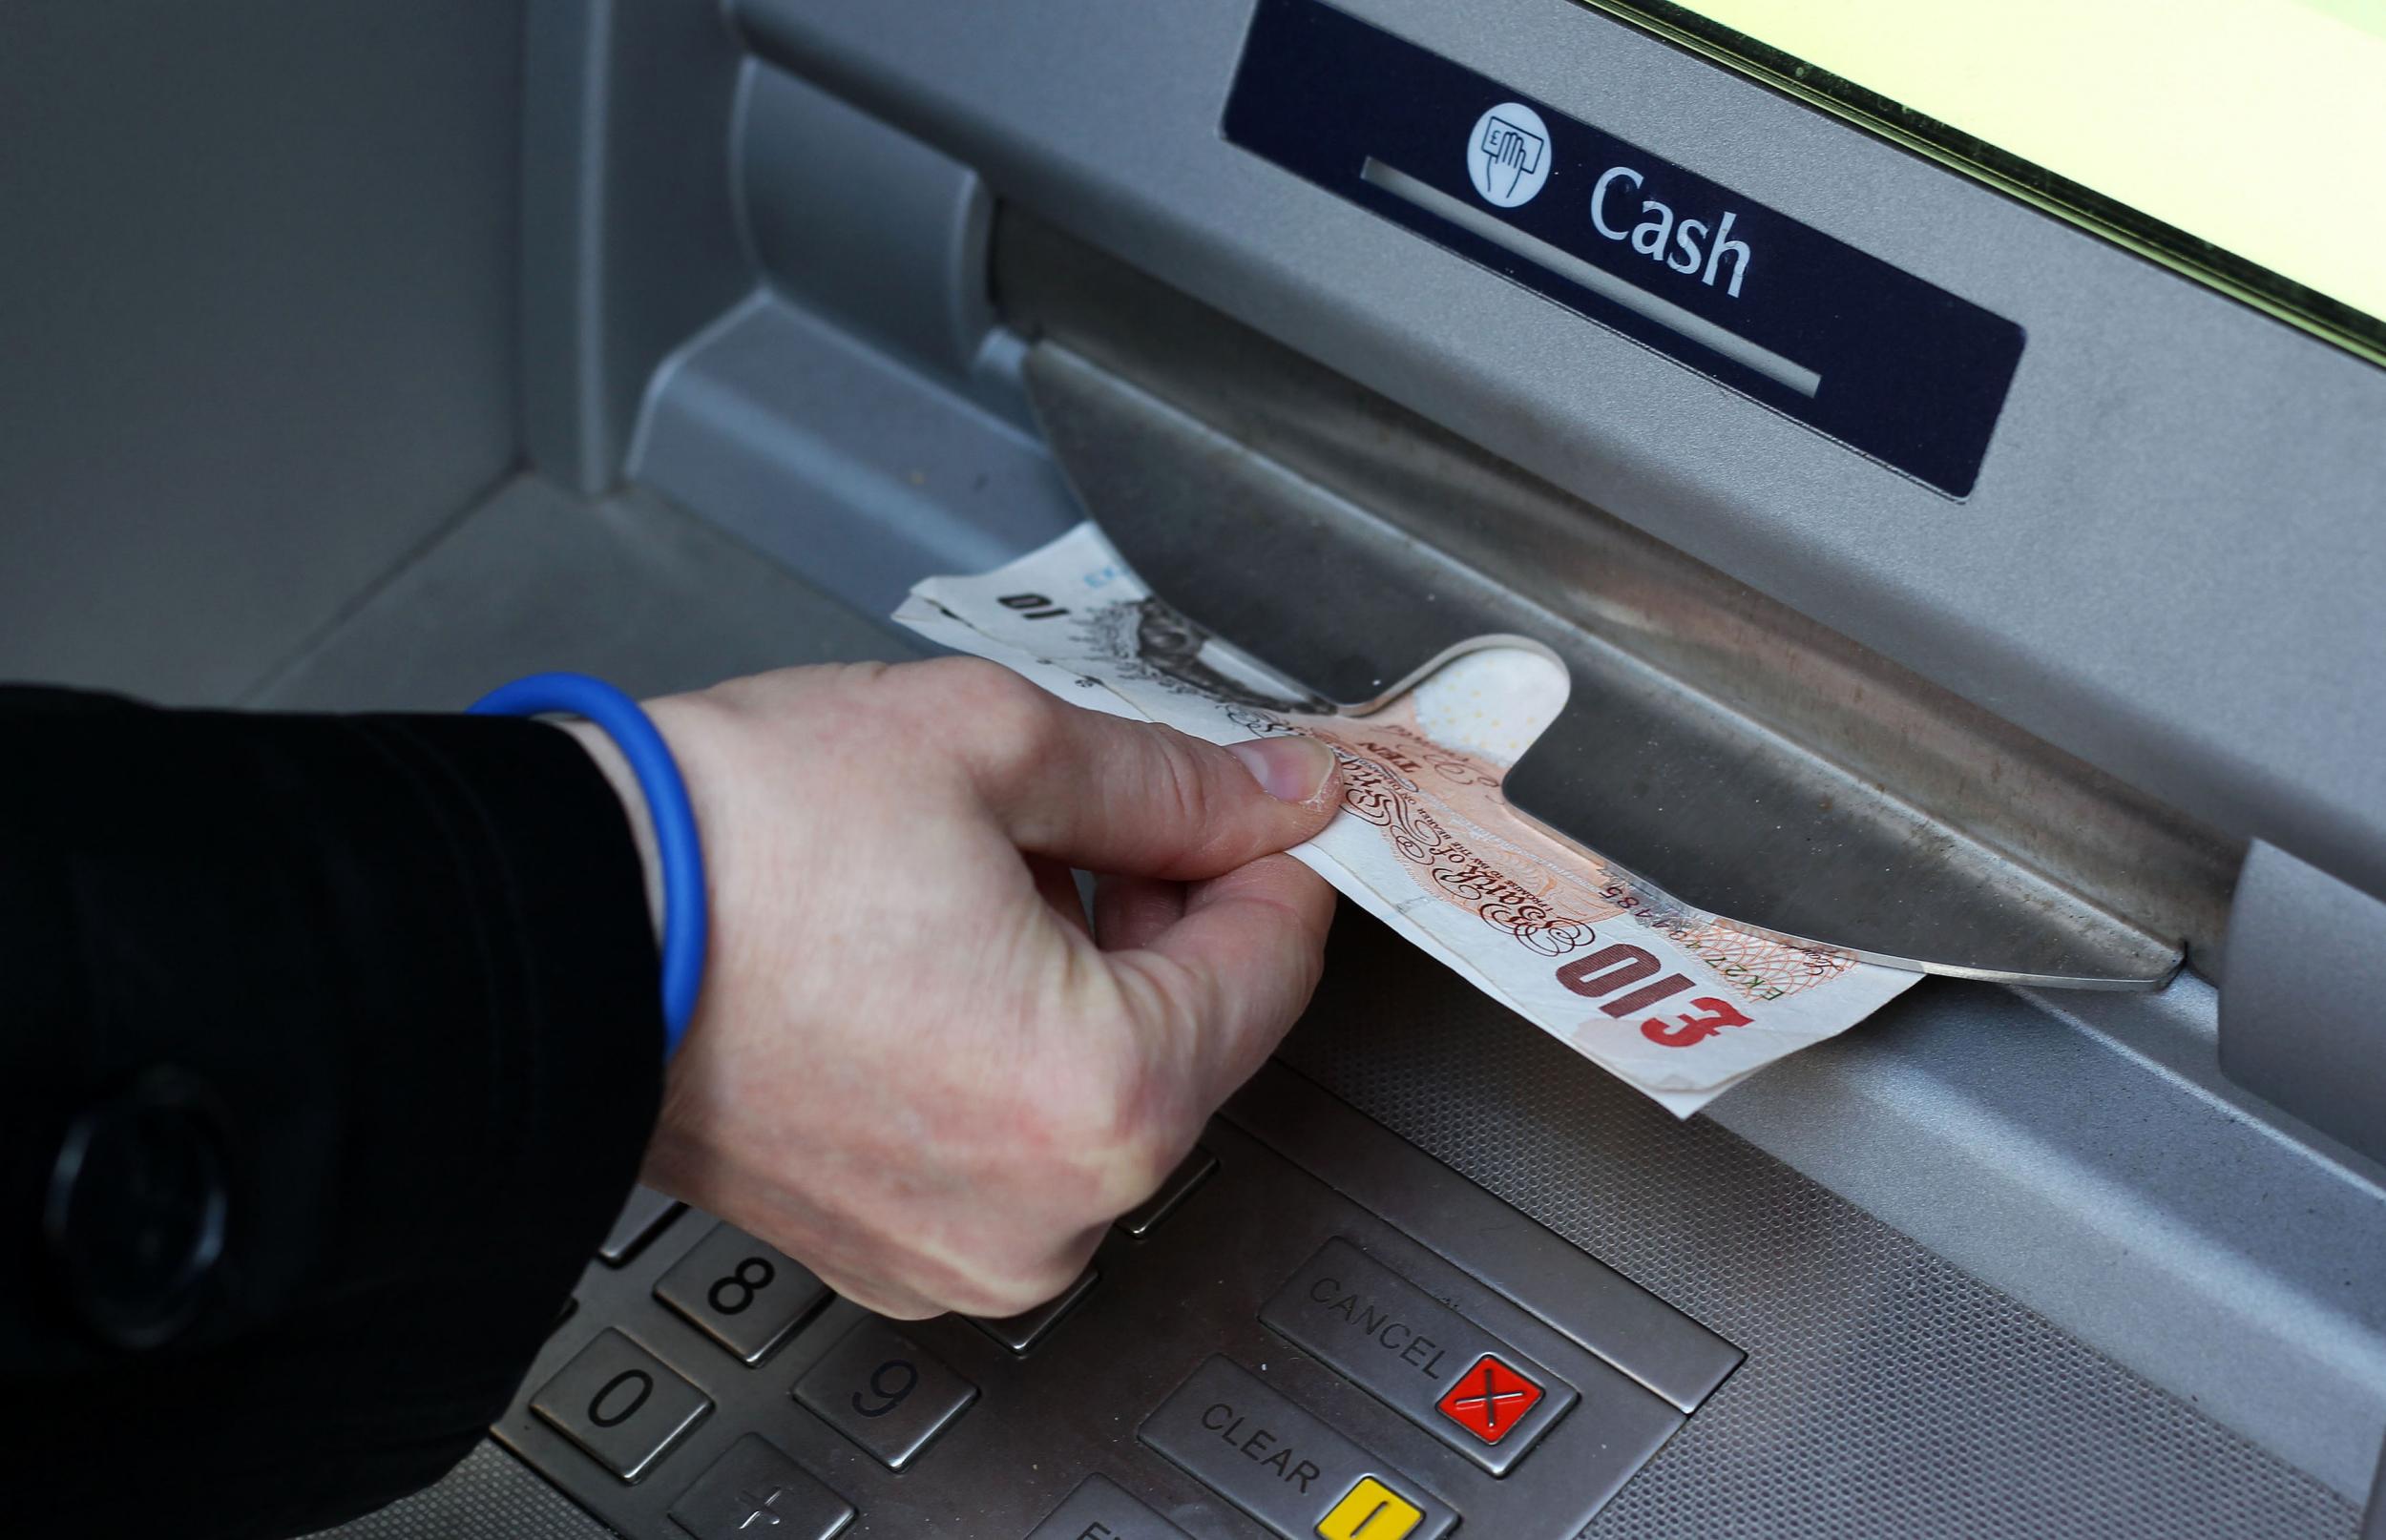 Payments systems operators in the UK have argued that the number of ATMs required is lower than in the past because people are making fewer purchases with notes